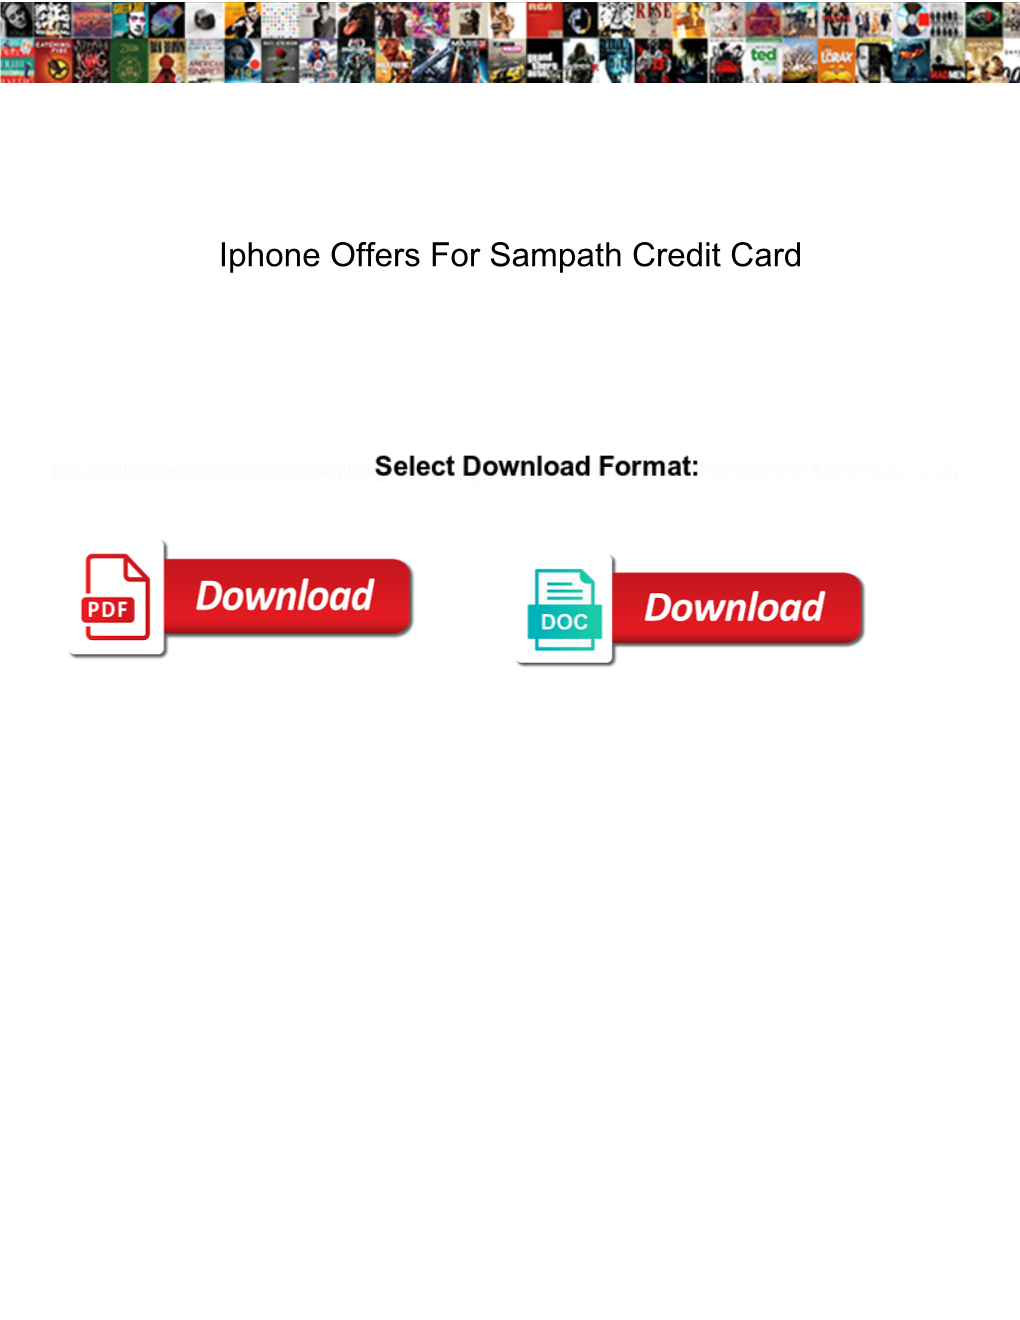 Iphone Offers for Sampath Credit Card